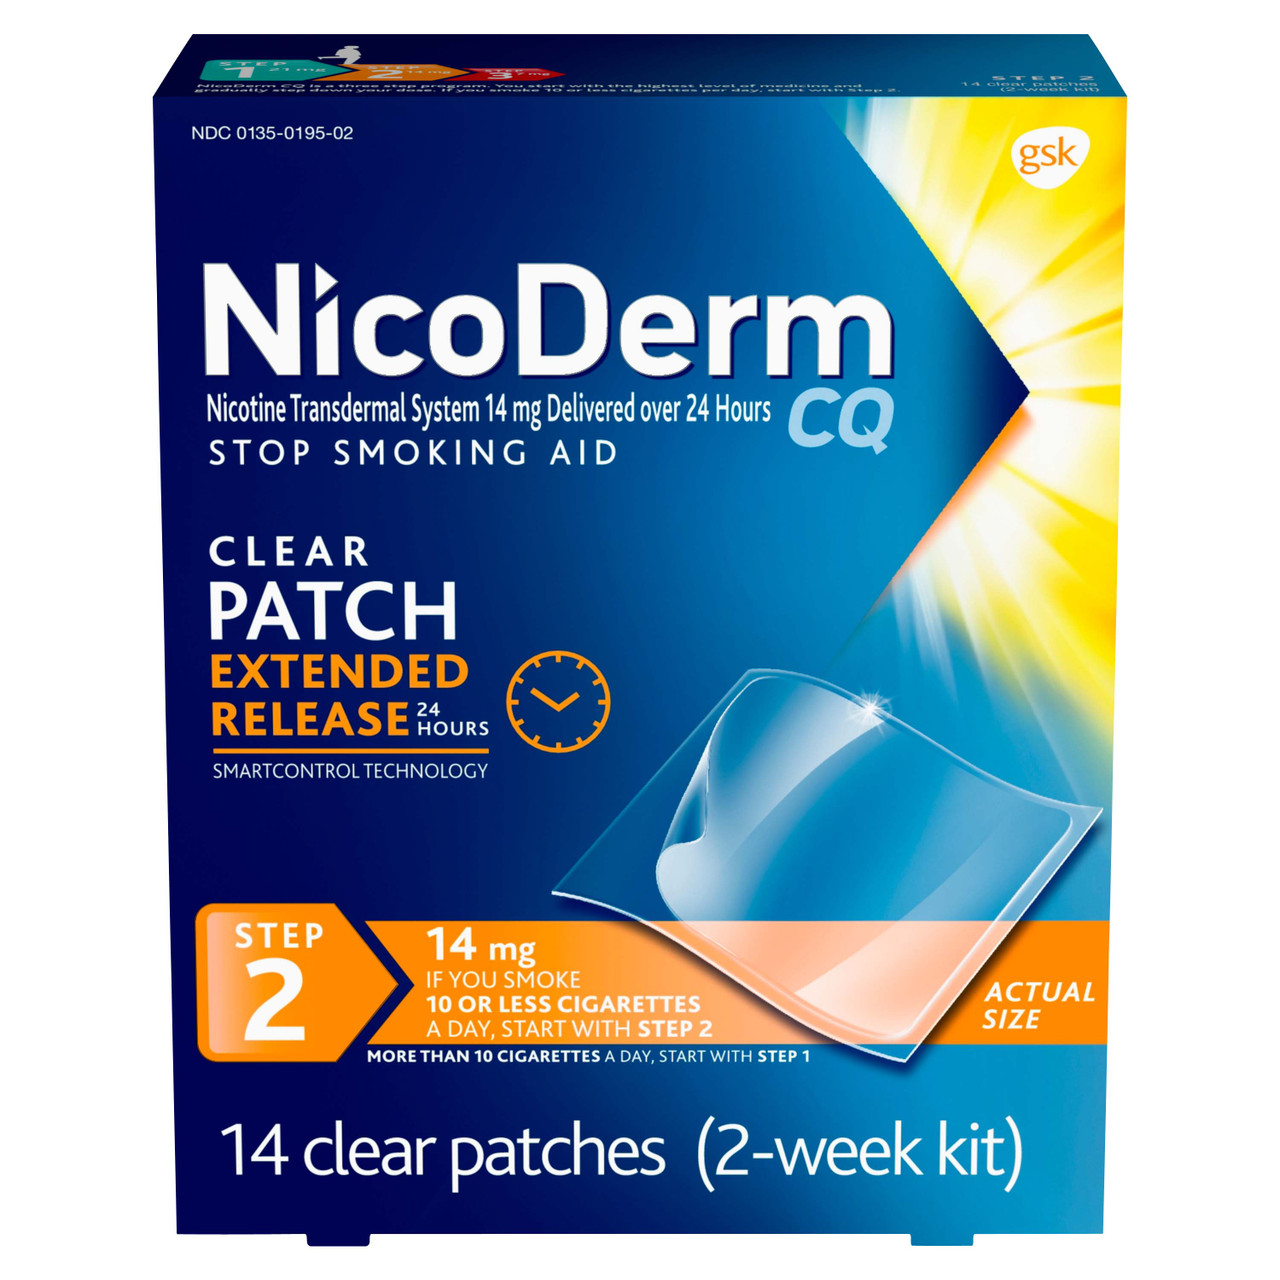 Can I Use 2 Nicotine Patches at Once?